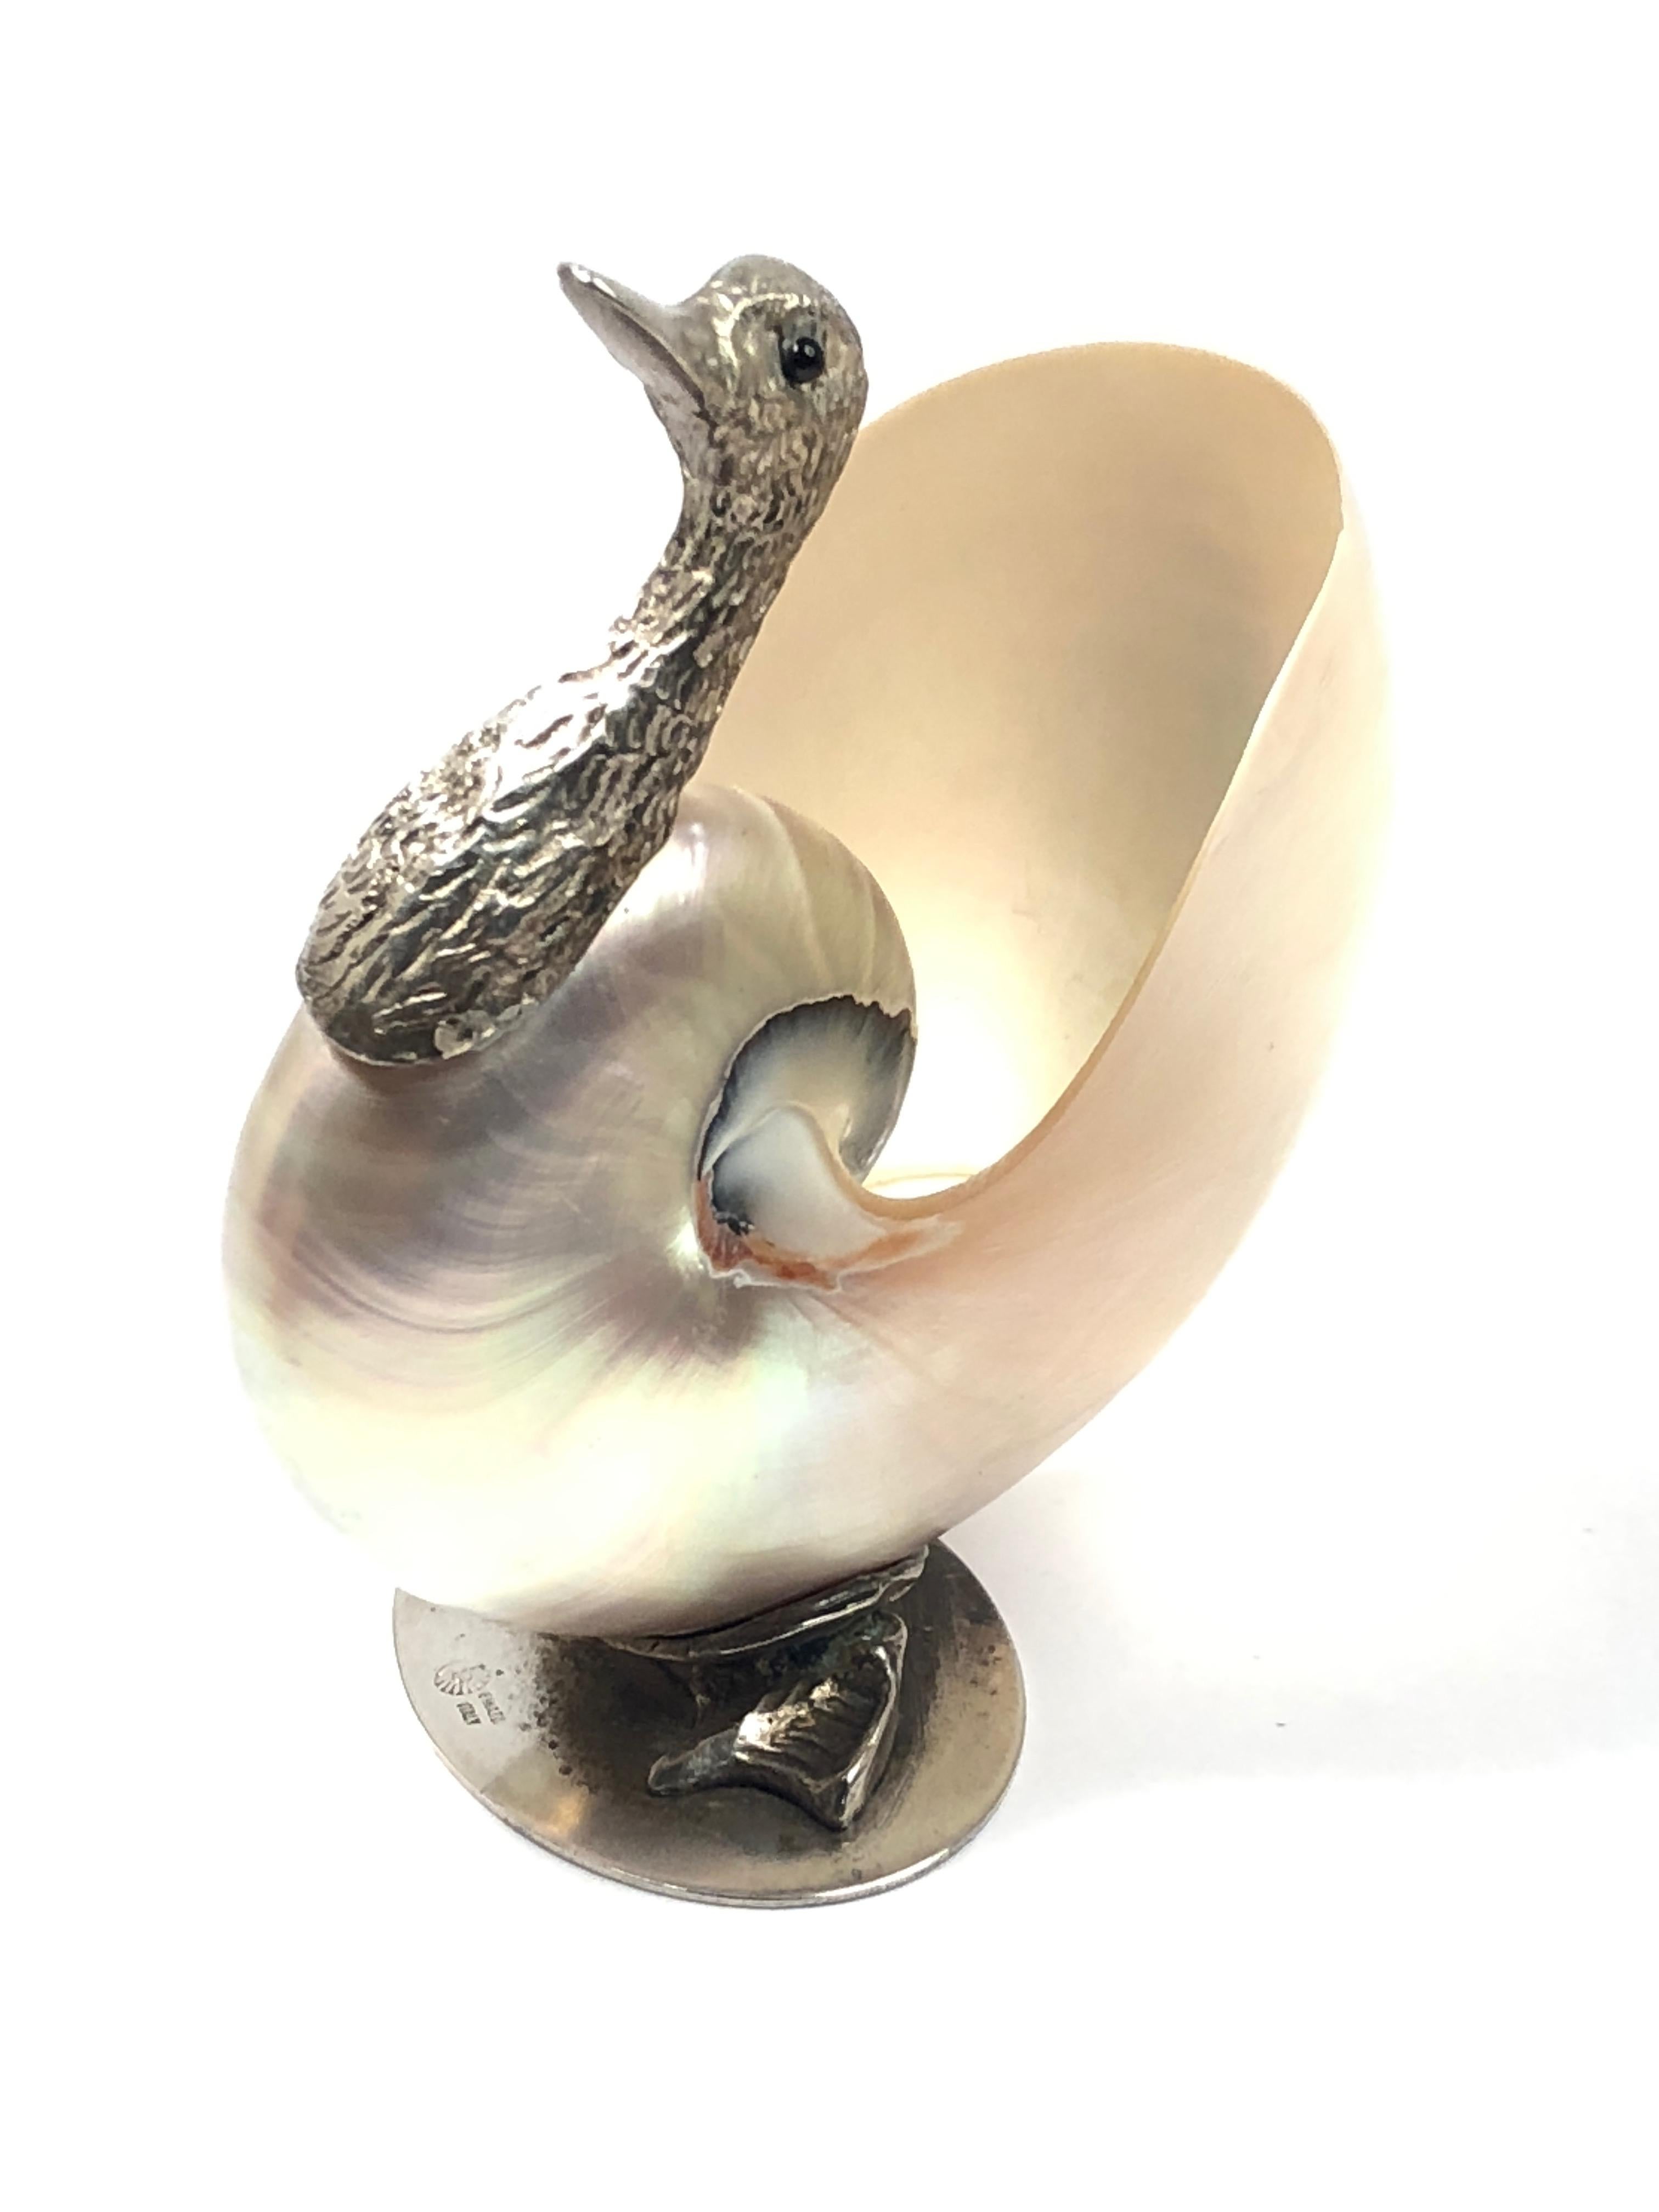 Italian Rare Signed Binazzi Goose Shell Trinket Bowl Sculpture, 1970s, Italy For Sale